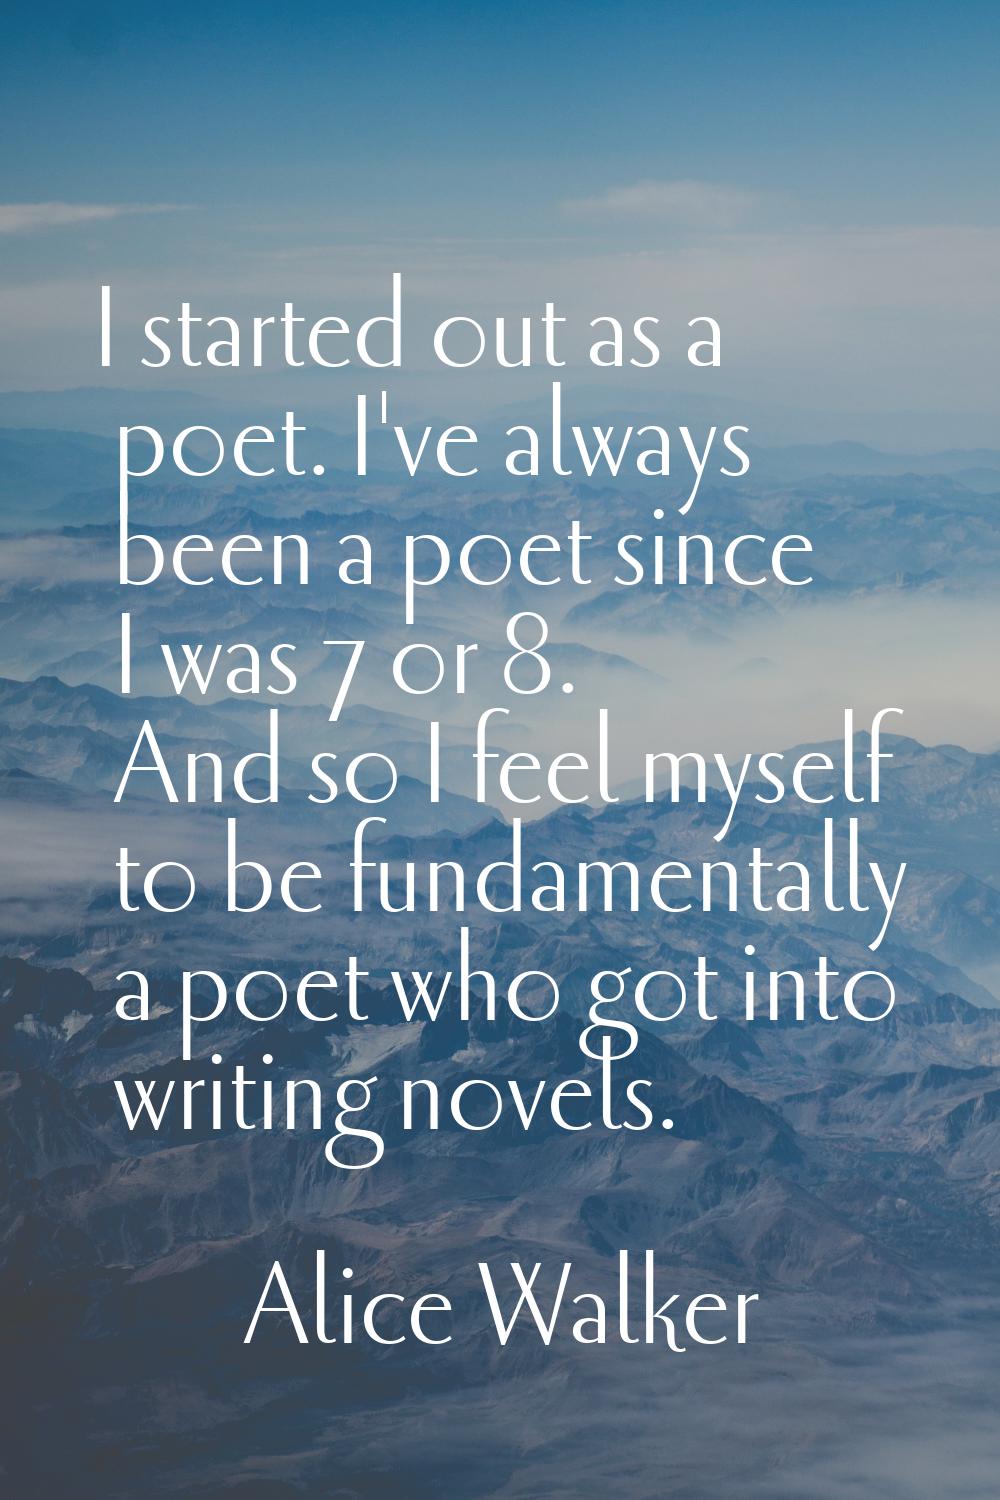 I started out as a poet. I've always been a poet since I was 7 or 8. And so I feel myself to be fun